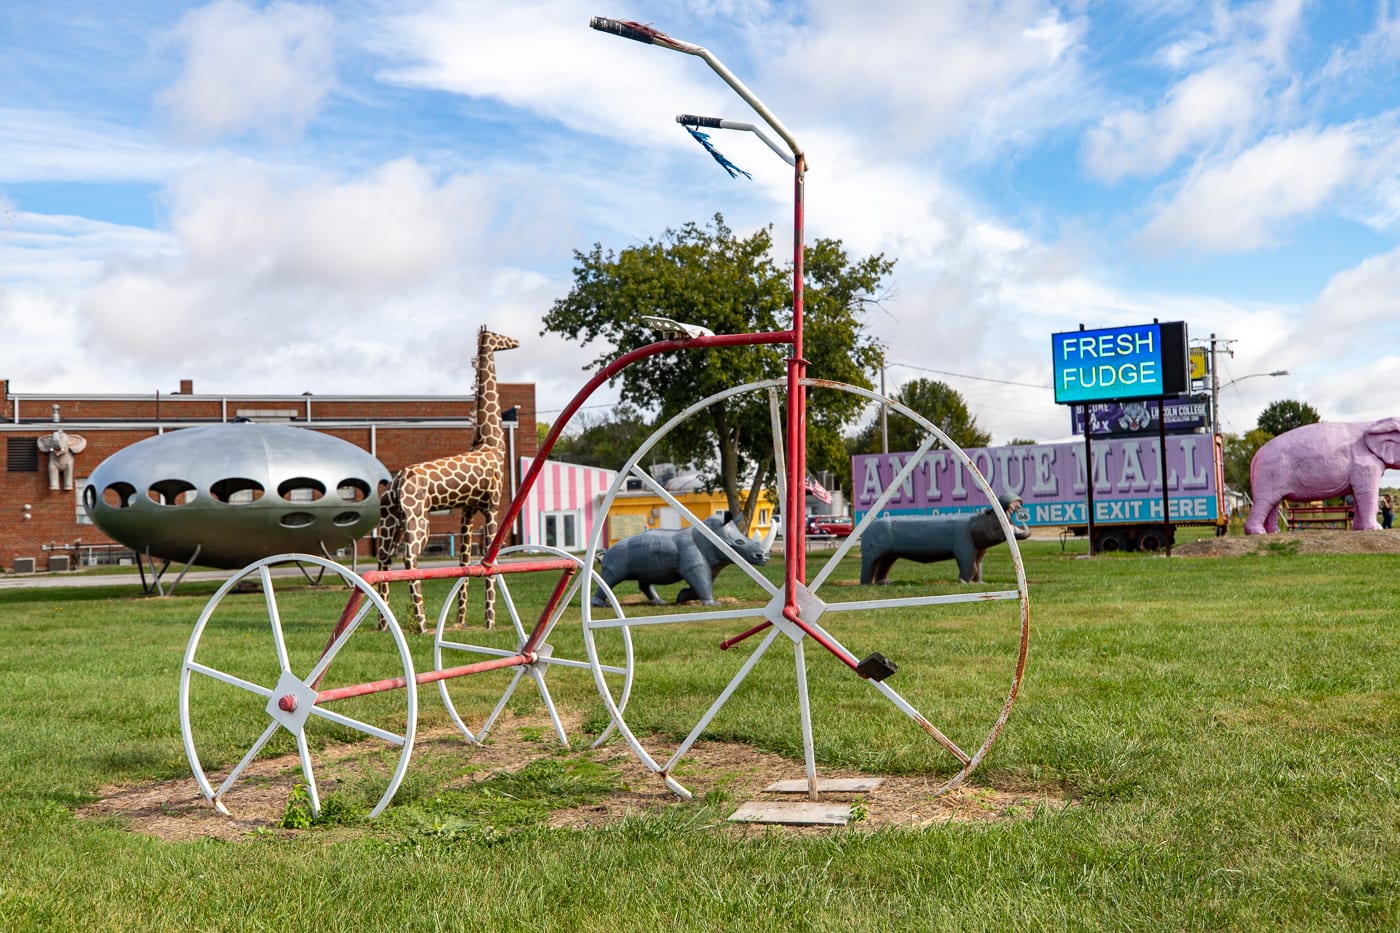 Giant bicycle at the Pink Elephant Antique Mall in Livingston, Illinois - Route 66 Roadside Attraction